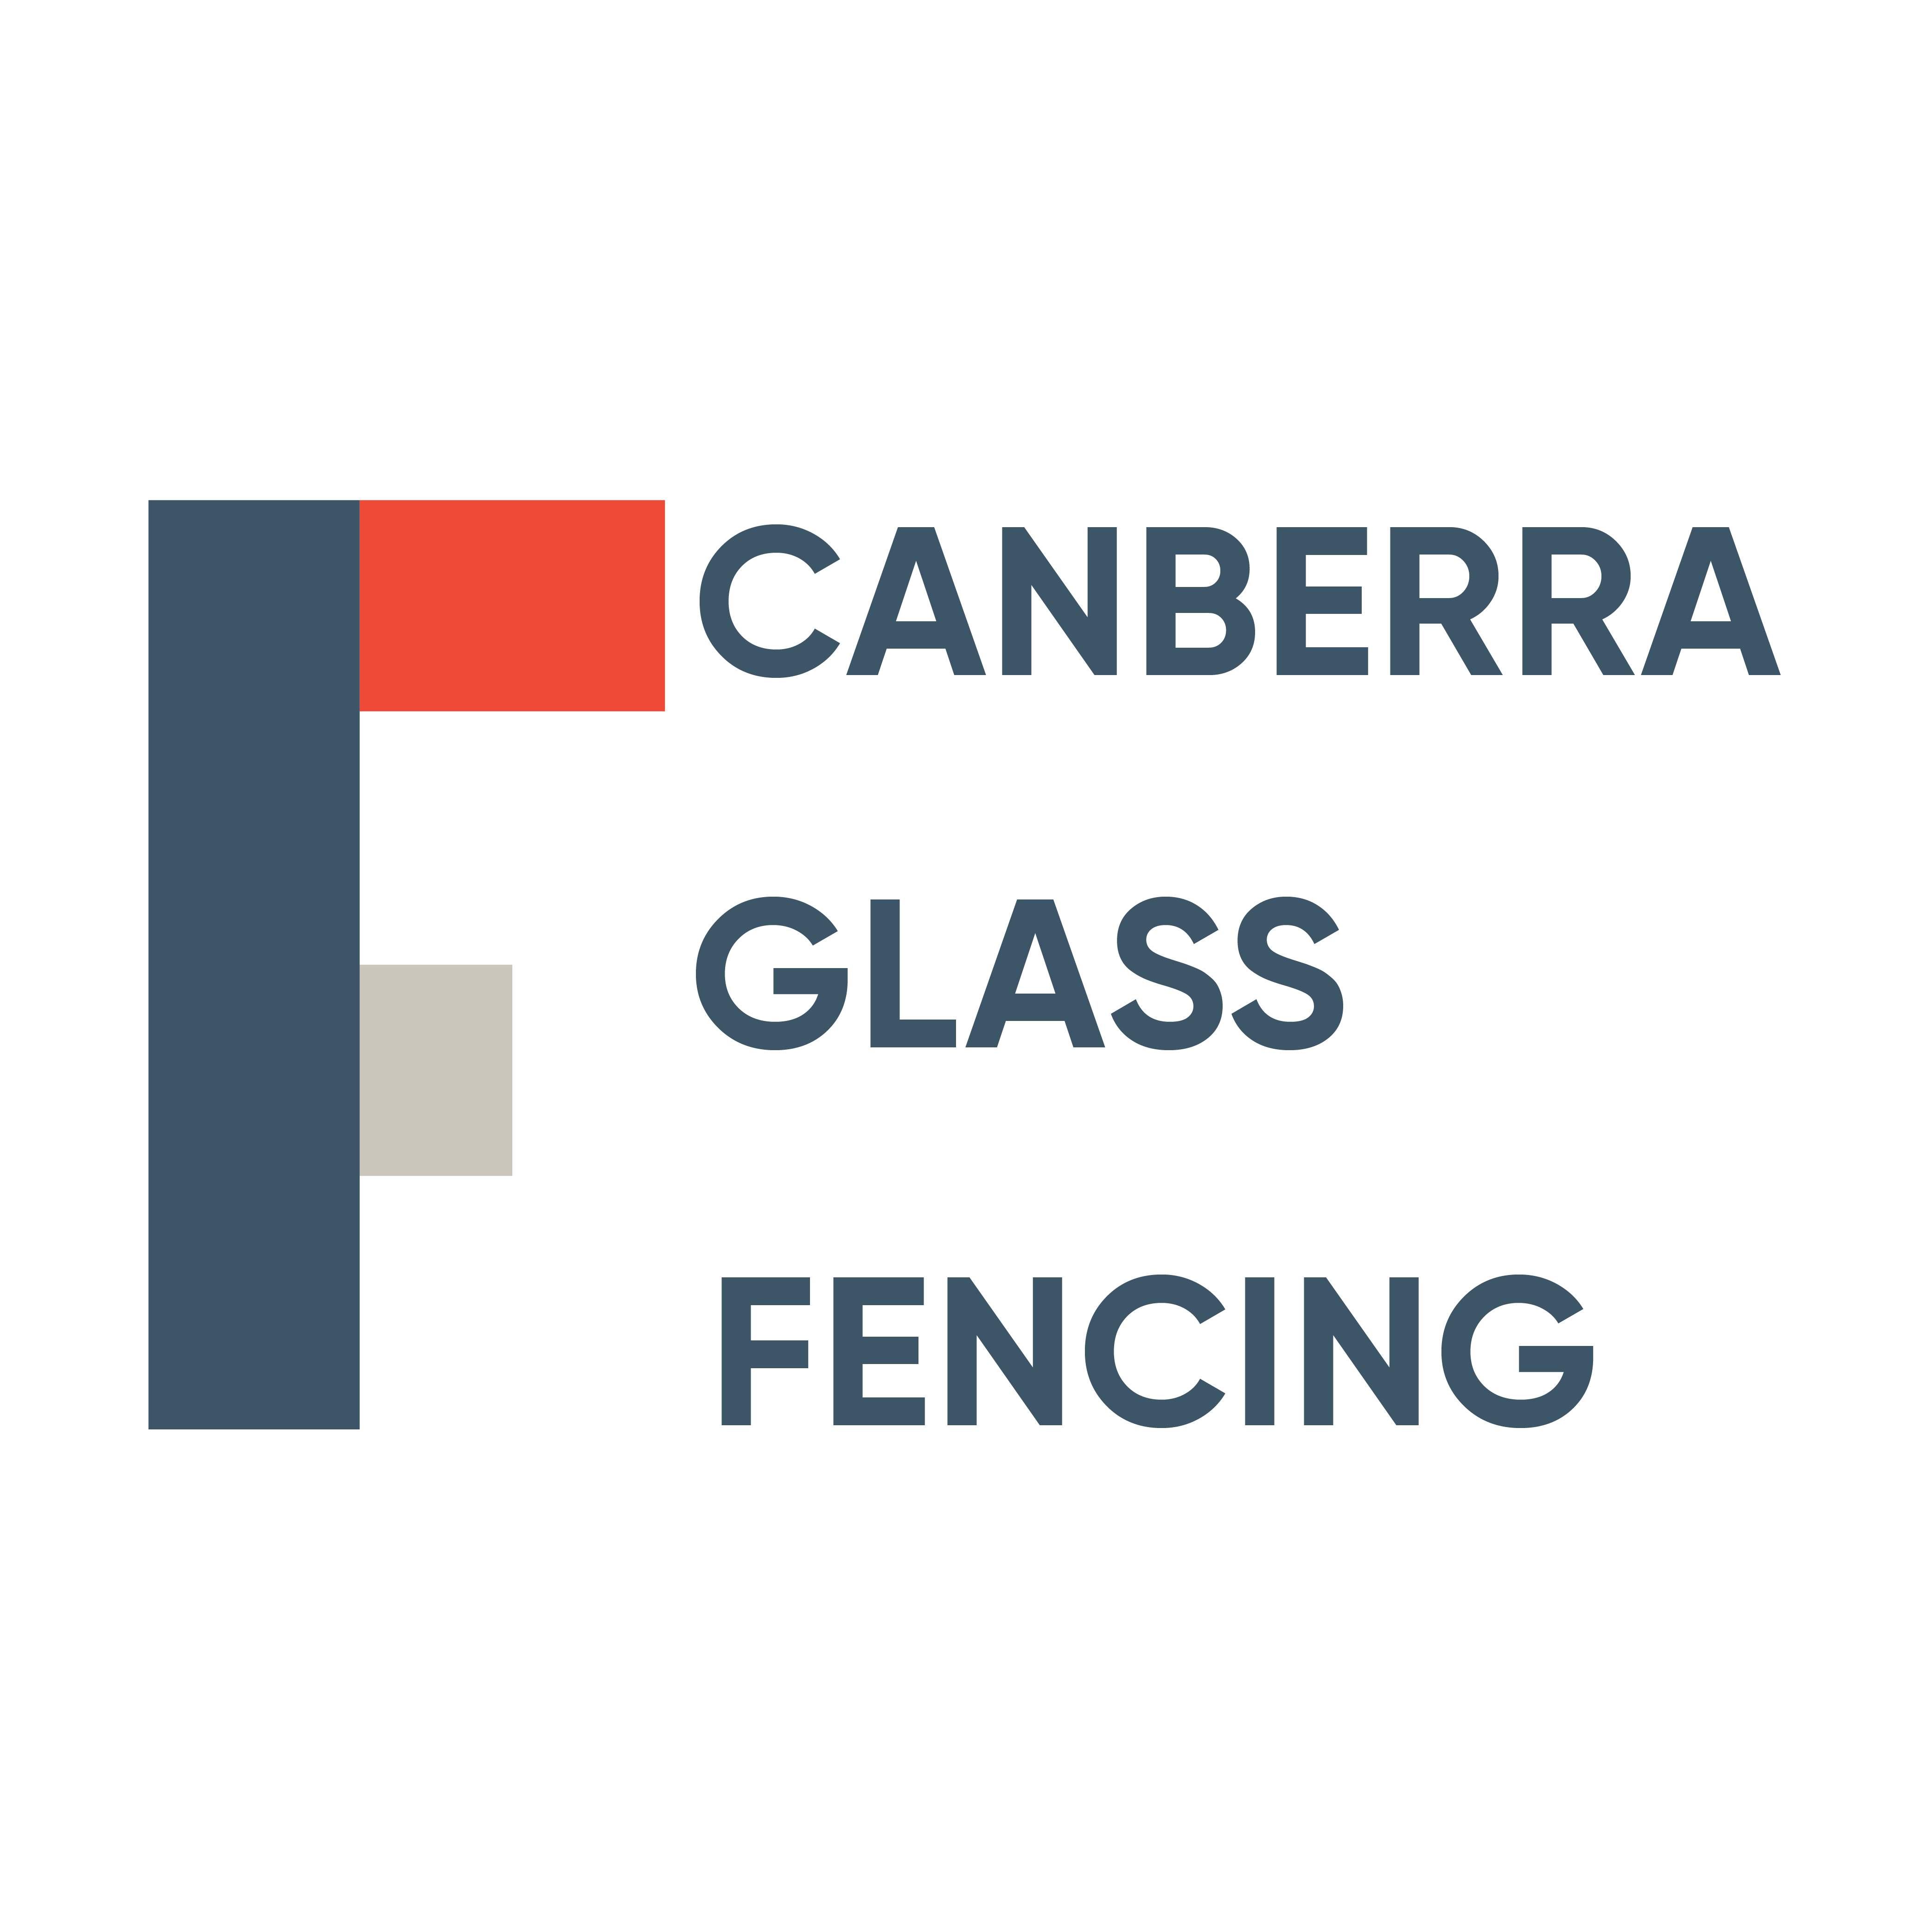 Canberra Glass Fencing